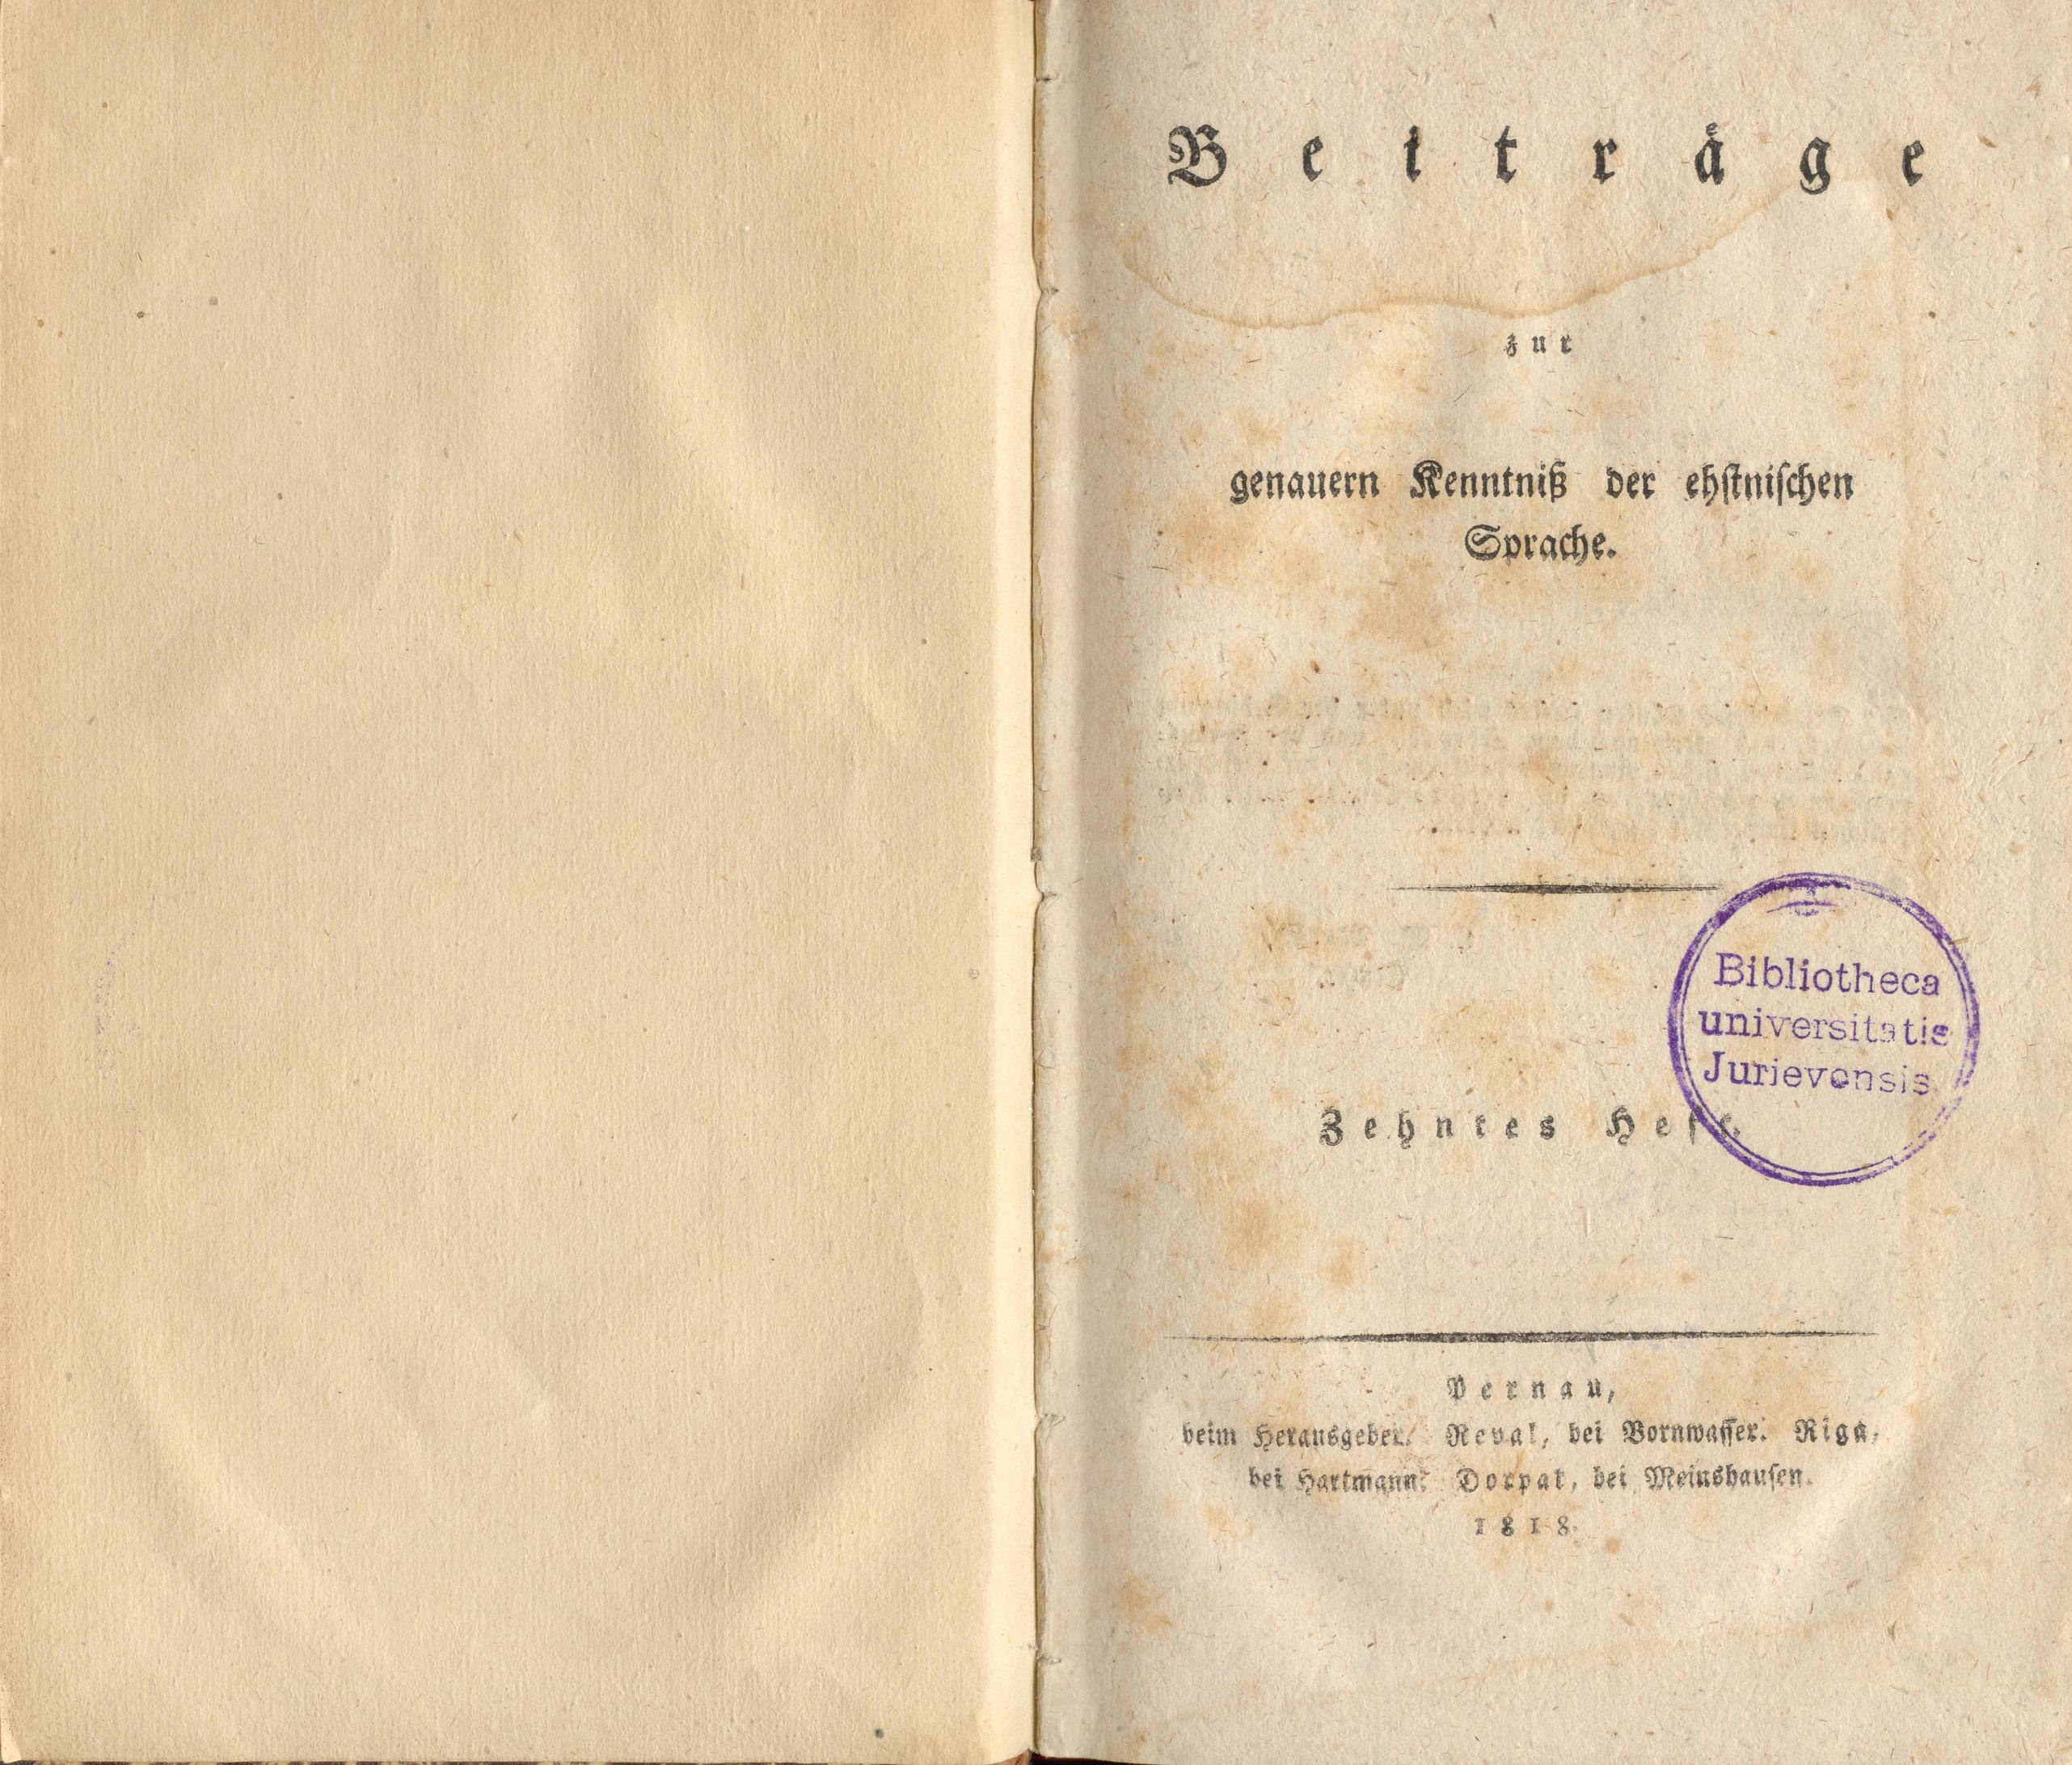 Beiträge [10] (1818) | 2. Title page